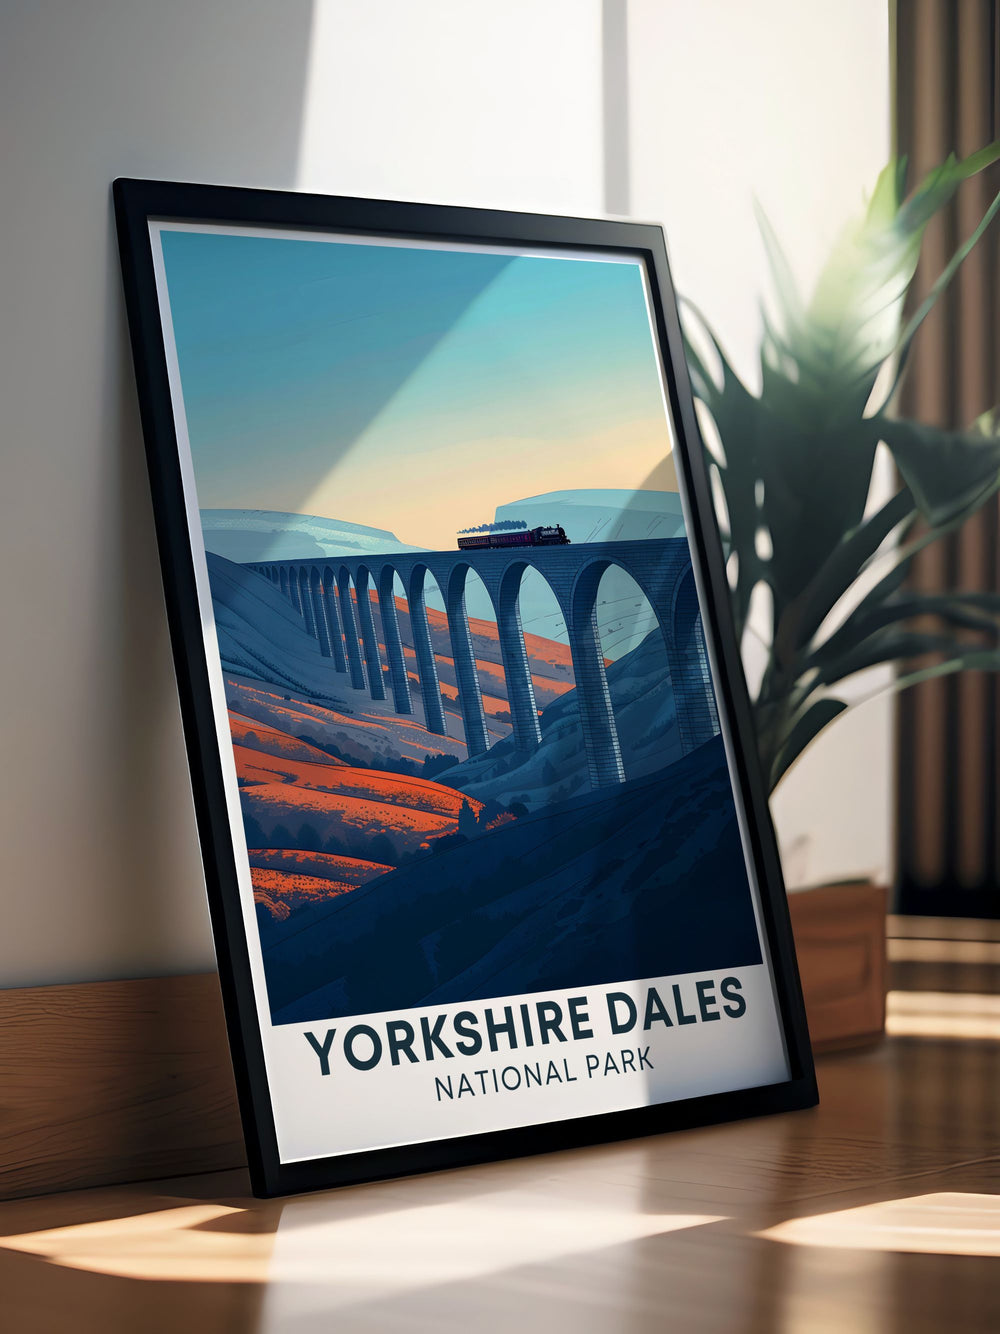 Discover the charm of the Yorkshire Dales with this Ribblehead Viaduct print featuring the historic viaduct and lush surroundings ideal for any nature lovers home.